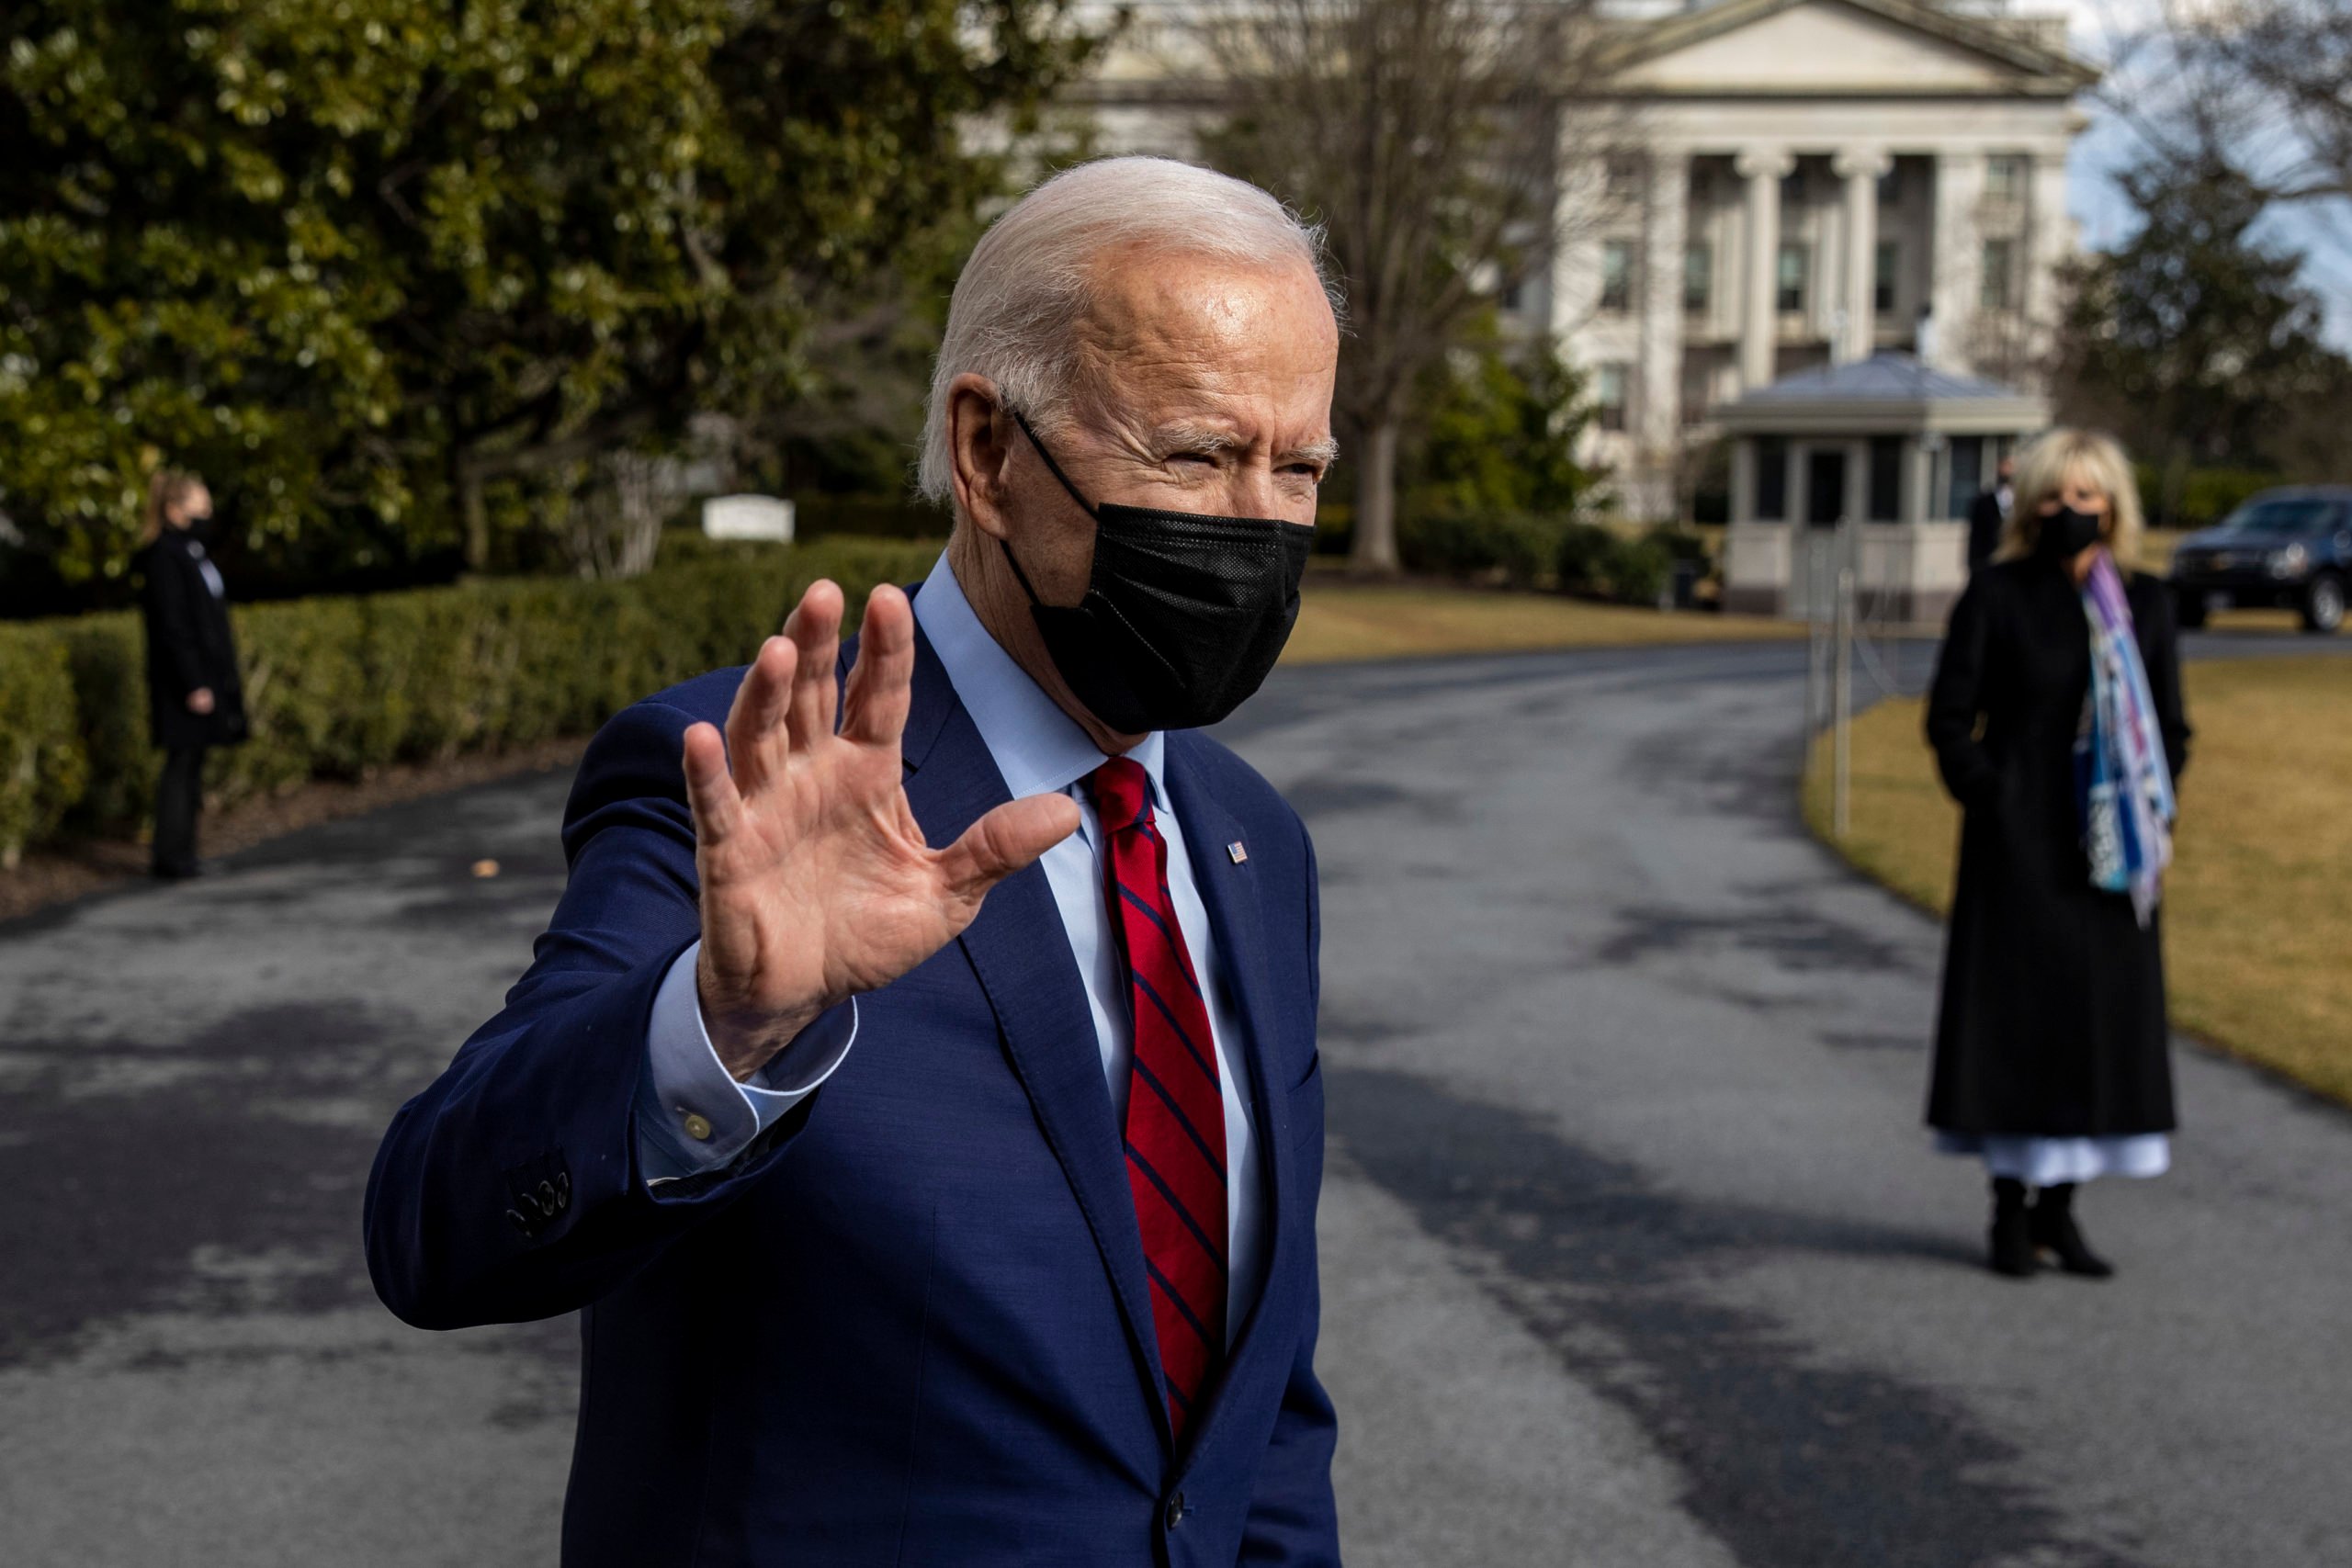 WASHINGTON, DC - FEBRUARY 27: U.S. President Joe Biden speaks to the media at the White House before he walks to Marine on the south lawn on February 27, 2021 in Washington, DC. President Joe Biden and first lady head to Wilmington, Delaware for the weekend. (Photo by Tasos Katopodis/Getty Images)